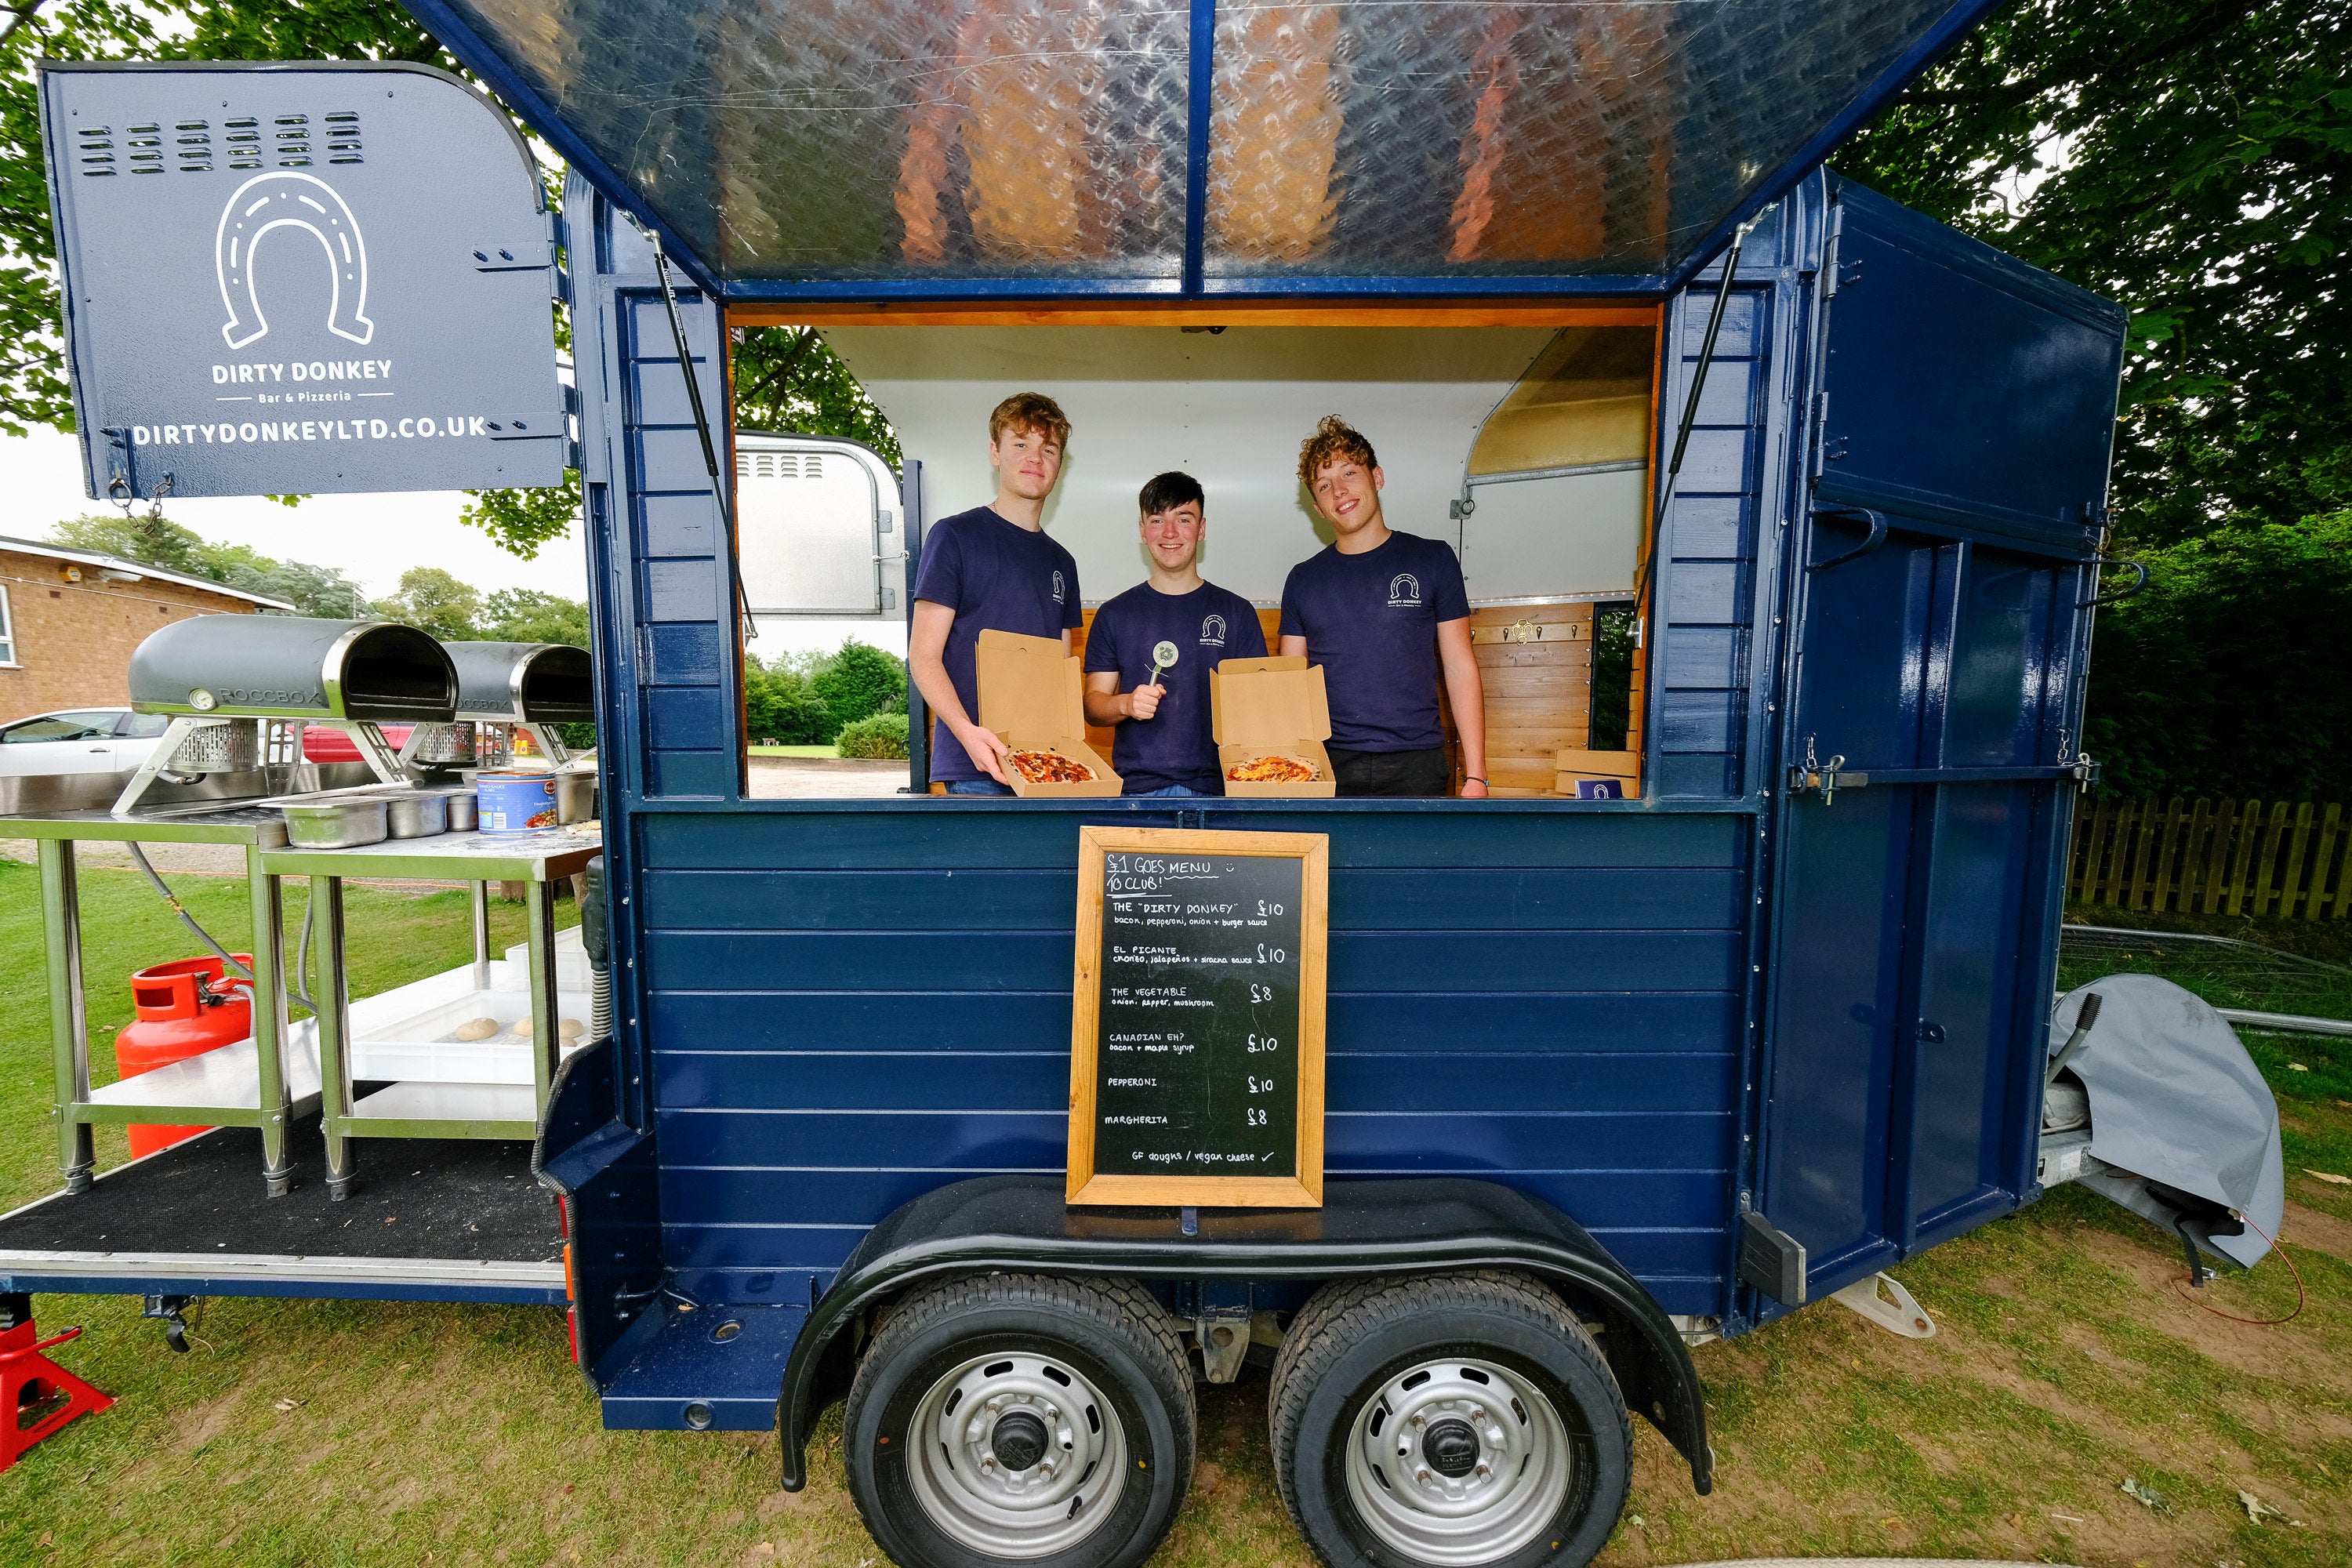 Ben Lyth, Jamie Morrall and Jacques Barker all aged 19. A group of business-savvy best friends from Solihull launched their own food business called Dirty Donkey